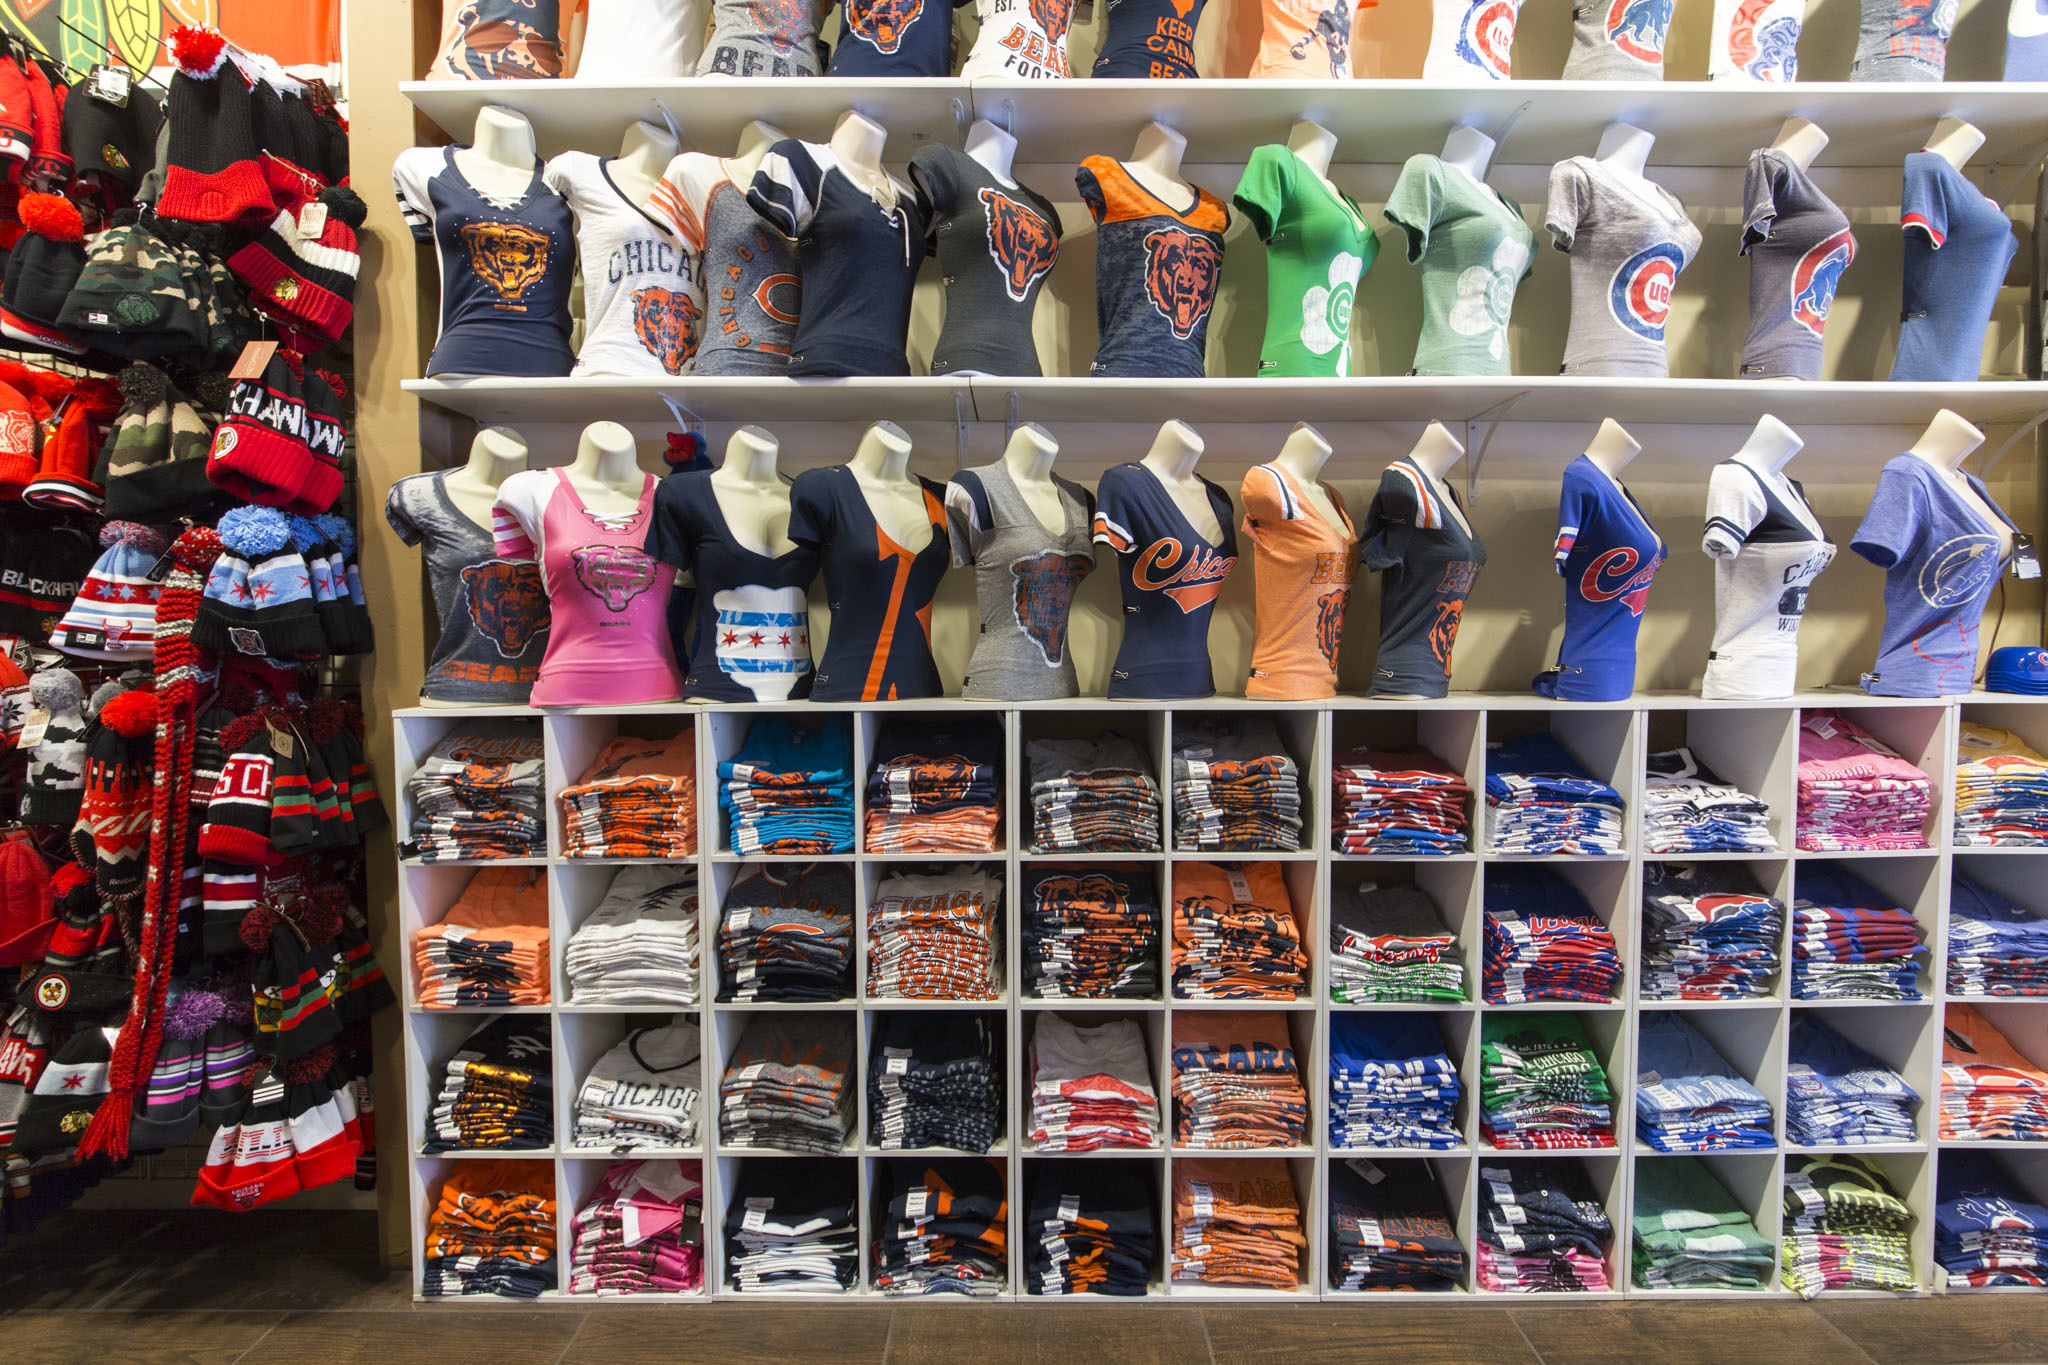 chicago bears outlet store